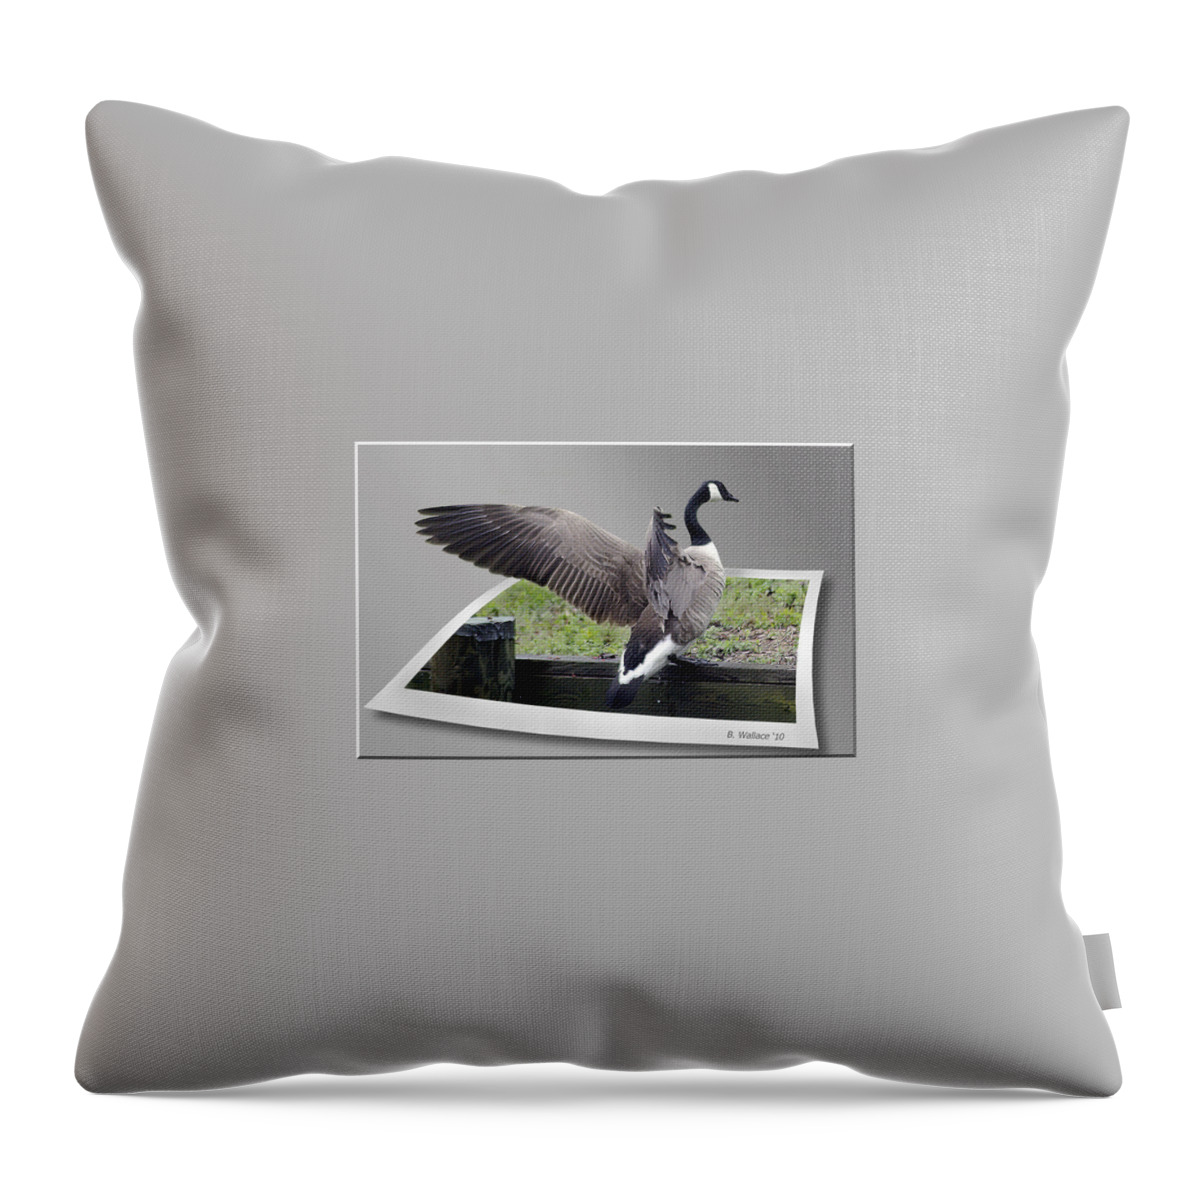 2d Throw Pillow featuring the photograph I Made It by Brian Wallace